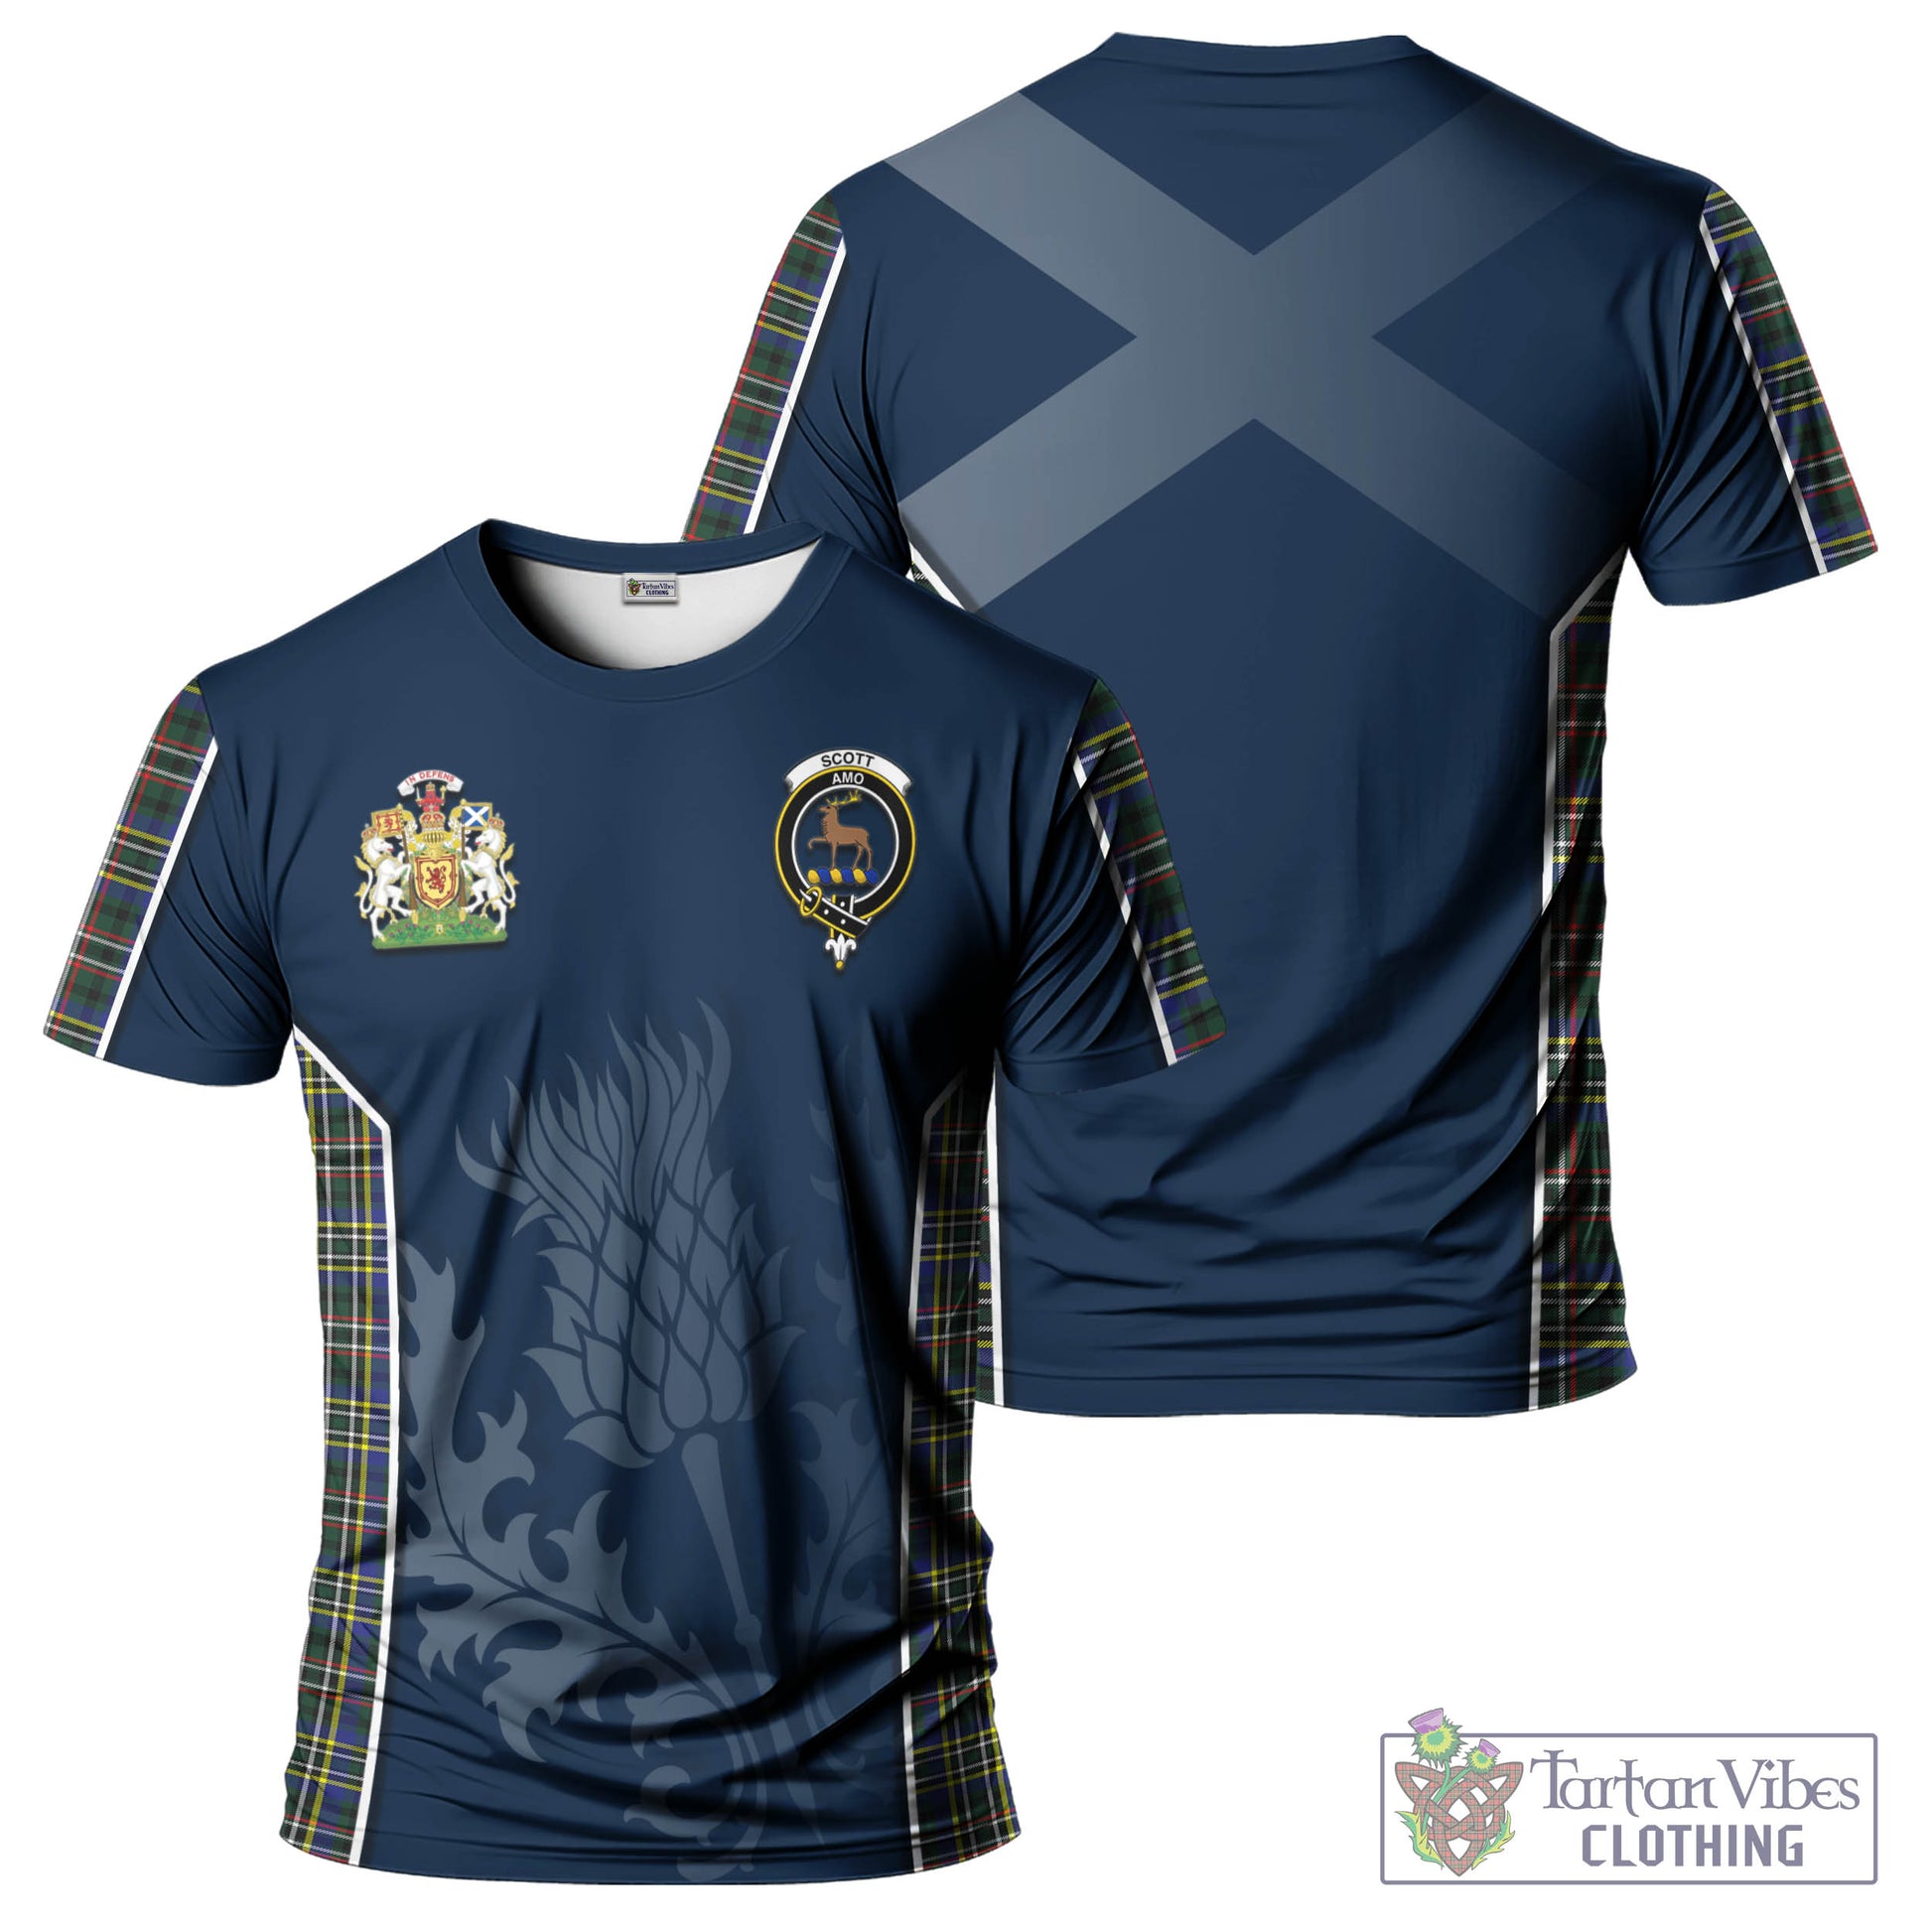 Tartan Vibes Clothing Scott Green Modern Tartan T-Shirt with Family Crest and Scottish Thistle Vibes Sport Style